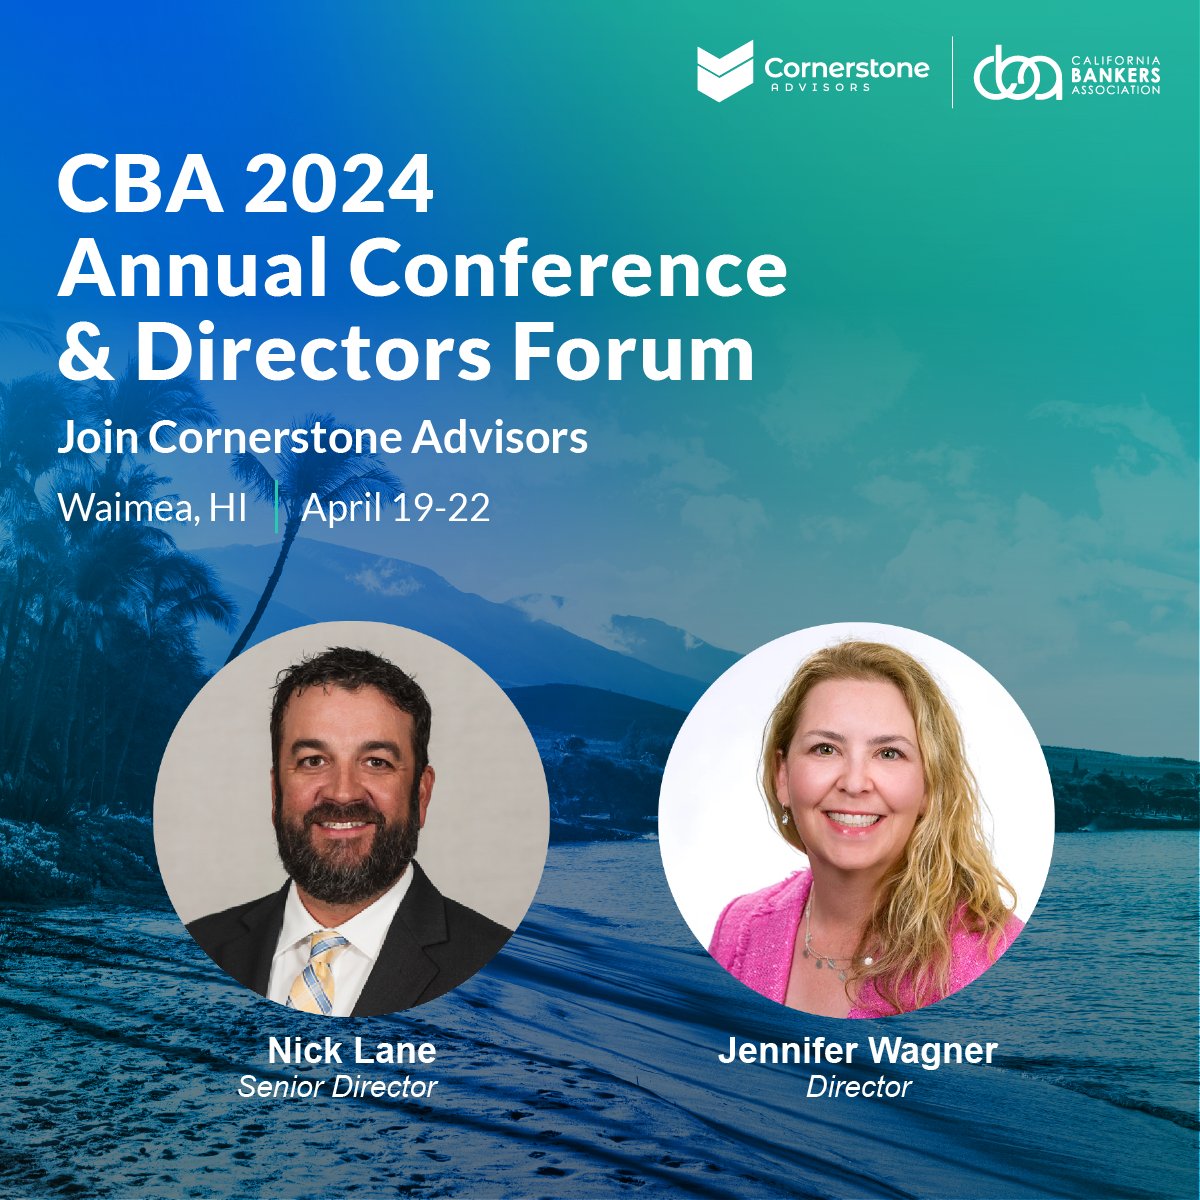 ✔️ If you're attending the @calbankers 2024 Annual Conference & Directors Forum, catch up with Nick Lane and Jennifer Wagner while there. #banking #banks #cba